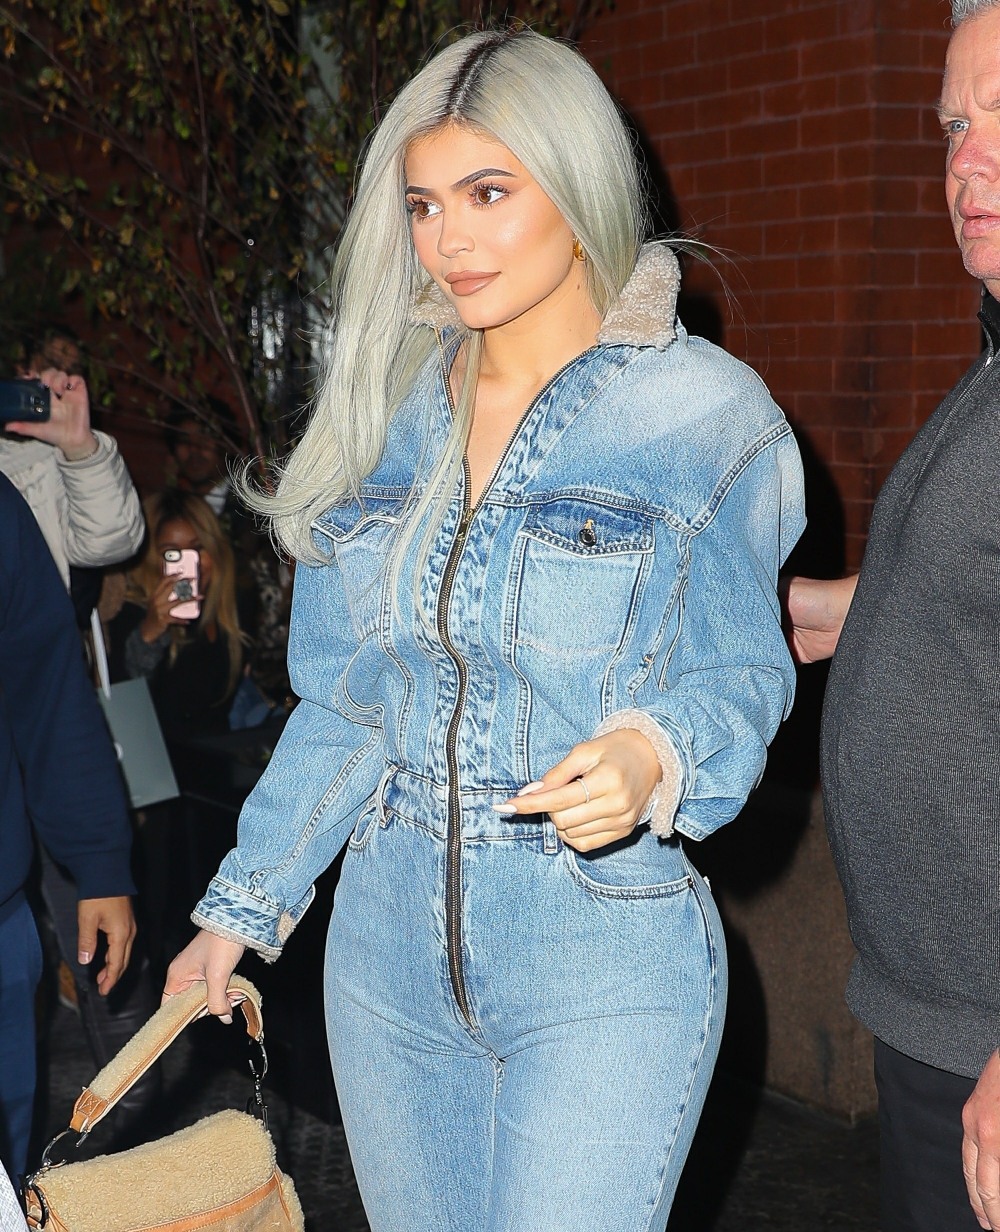 Kylie Jenner looks striking in all denim as she steps out of her NYC hotel